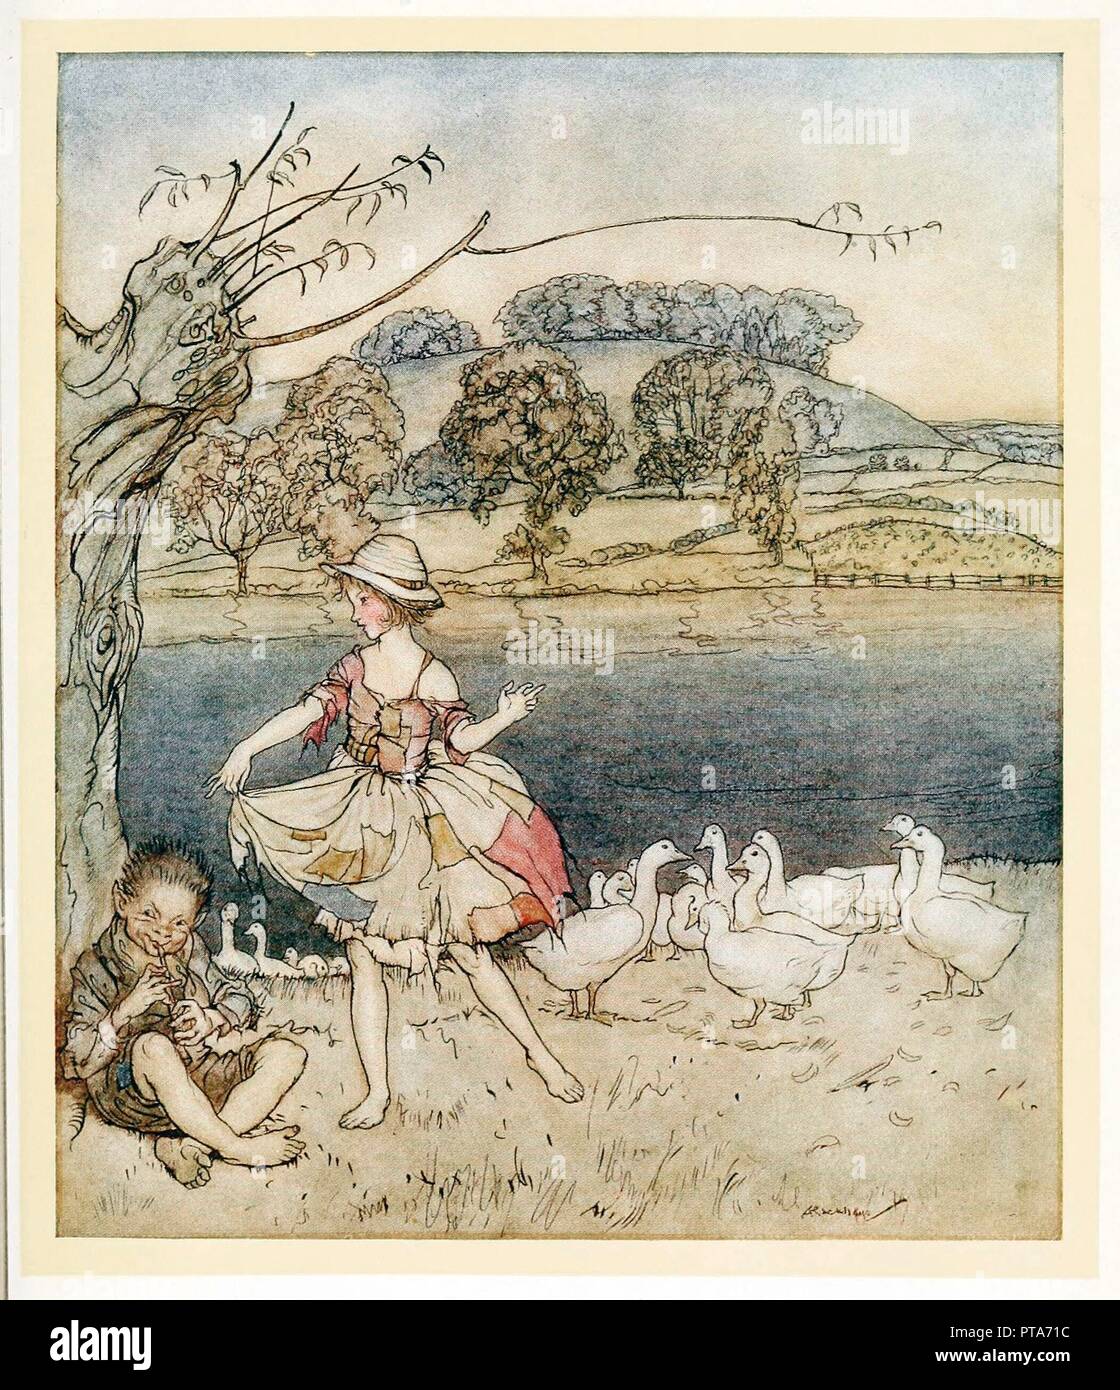 Tattercoats dancing while the goosherd pipes, from English Fairy Tales, pub. 1922. Creator: Arthur Rackham (1867 - 1939). Stock Photo